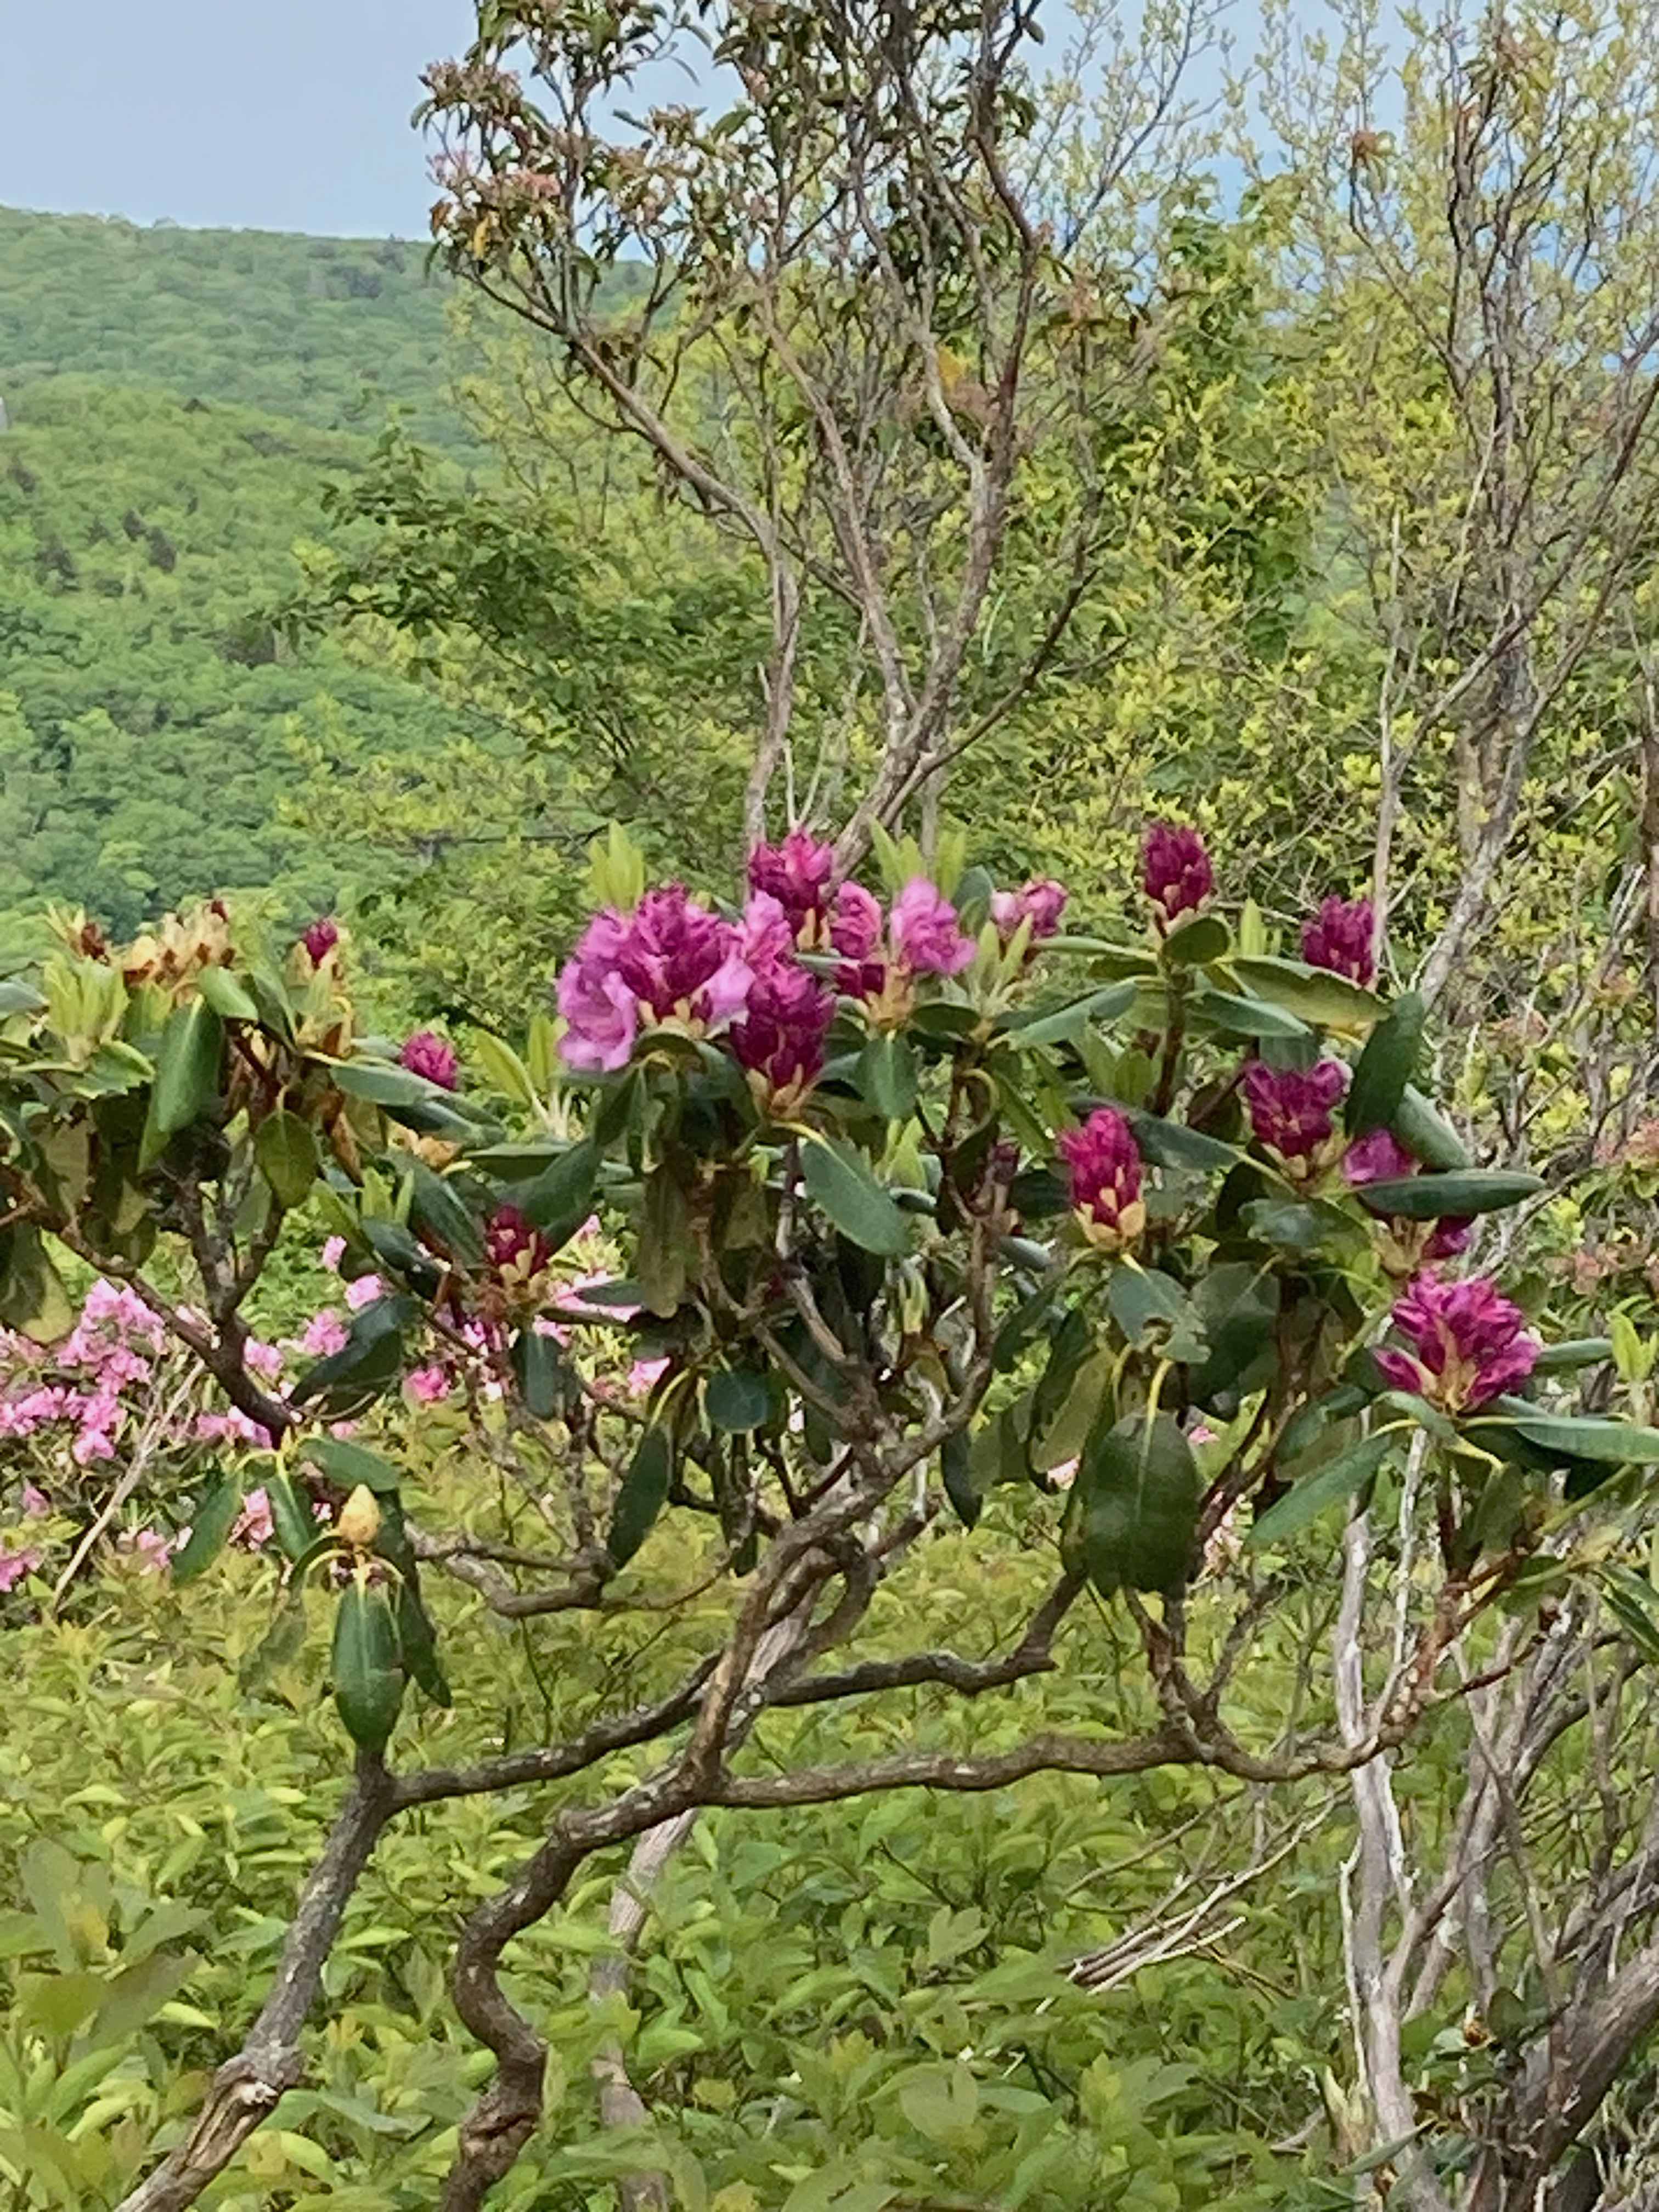 The Scientific Name is Rhododendron catawbiense. You will likely hear them called Catawba Rhododendron, Mountain Rosebay, Catawba Rosebay, Purple Rhododendron, Purple Laurel, Rosebay Laurel, Pink Laurel. This picture shows the Large rose/magenta colored flowers. of Rhododendron catawbiense